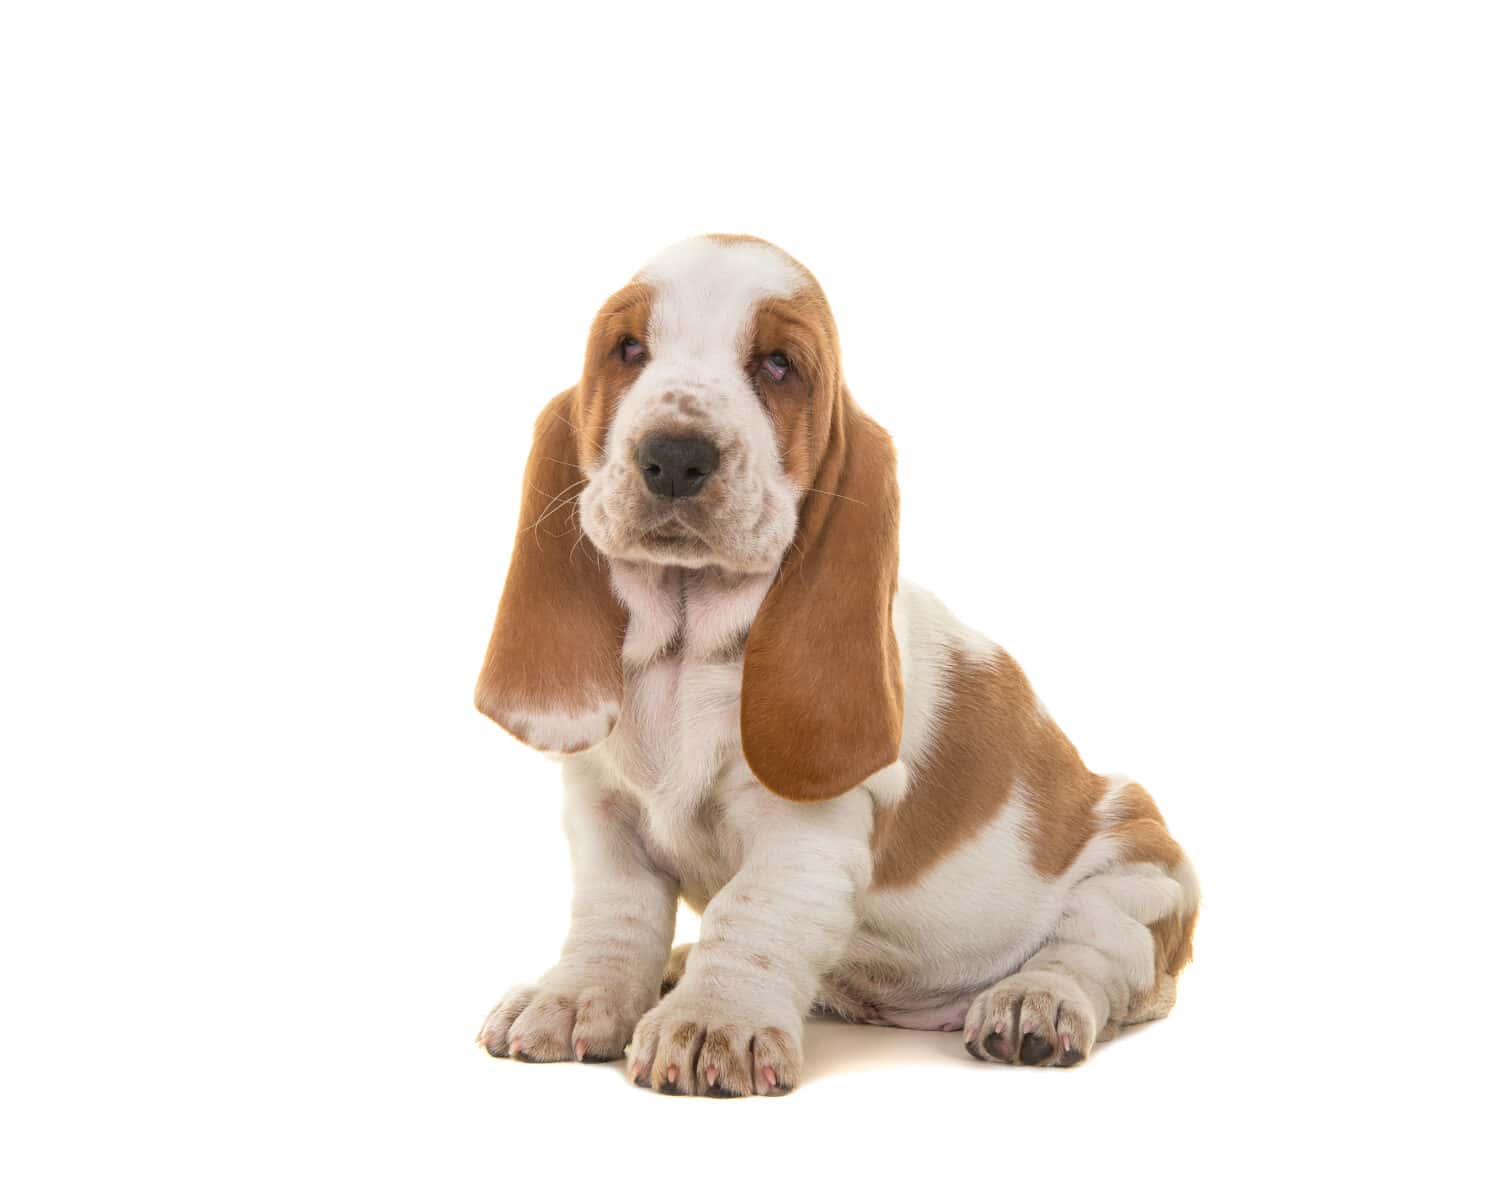 Cute sitting tan and white basset hound puppy looking at the camera isolated on a white background 